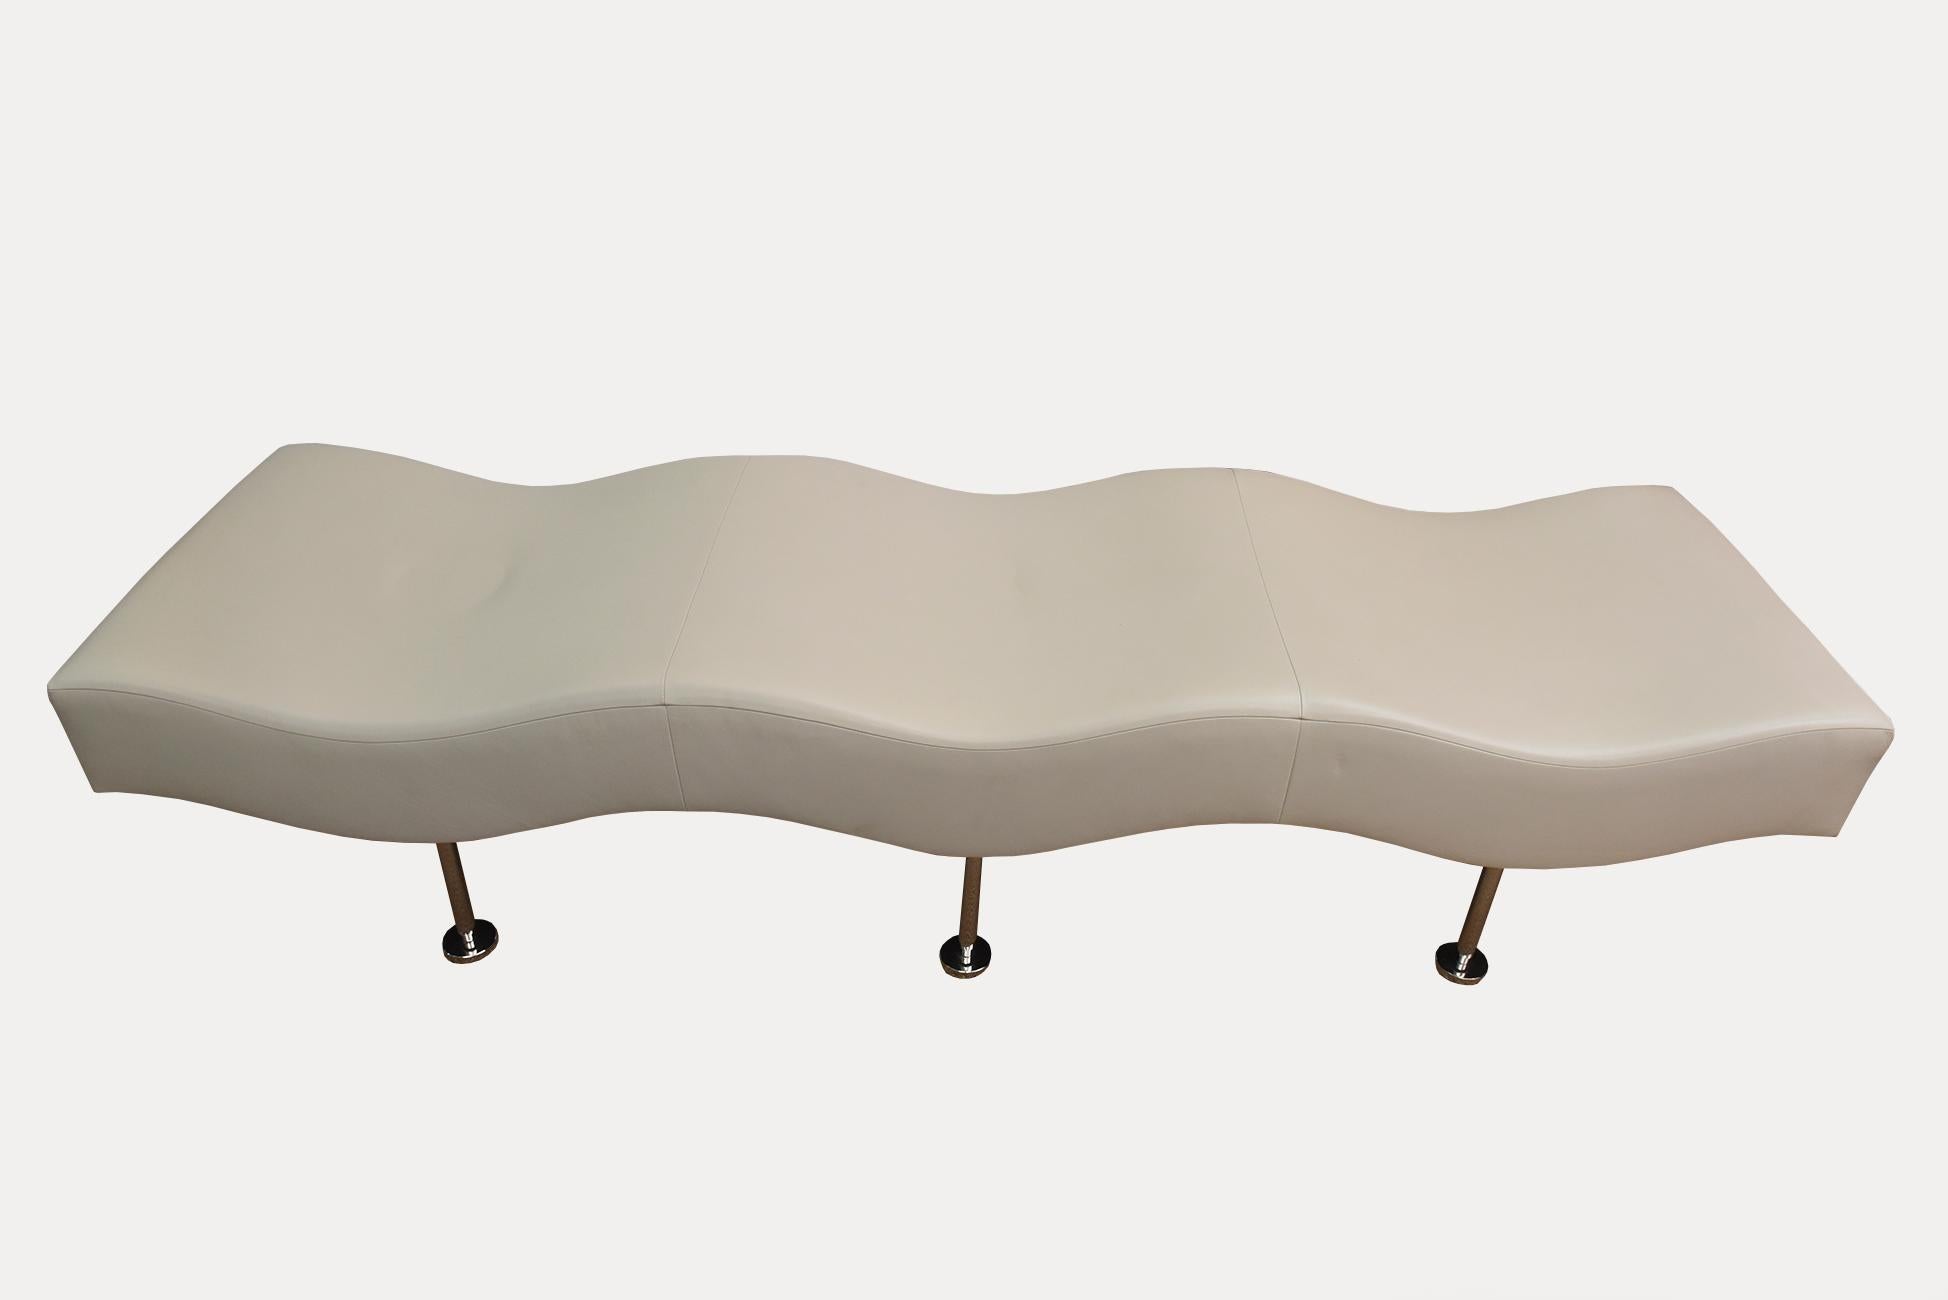 This long and 3 seat wave chaise sculptural bench was designed by Stanley Jay Friedman for Brueton in the 1980s. It has been coined the undulatus bench as in waves. There is a feeling of momentum. It has the original light tan leather on it and